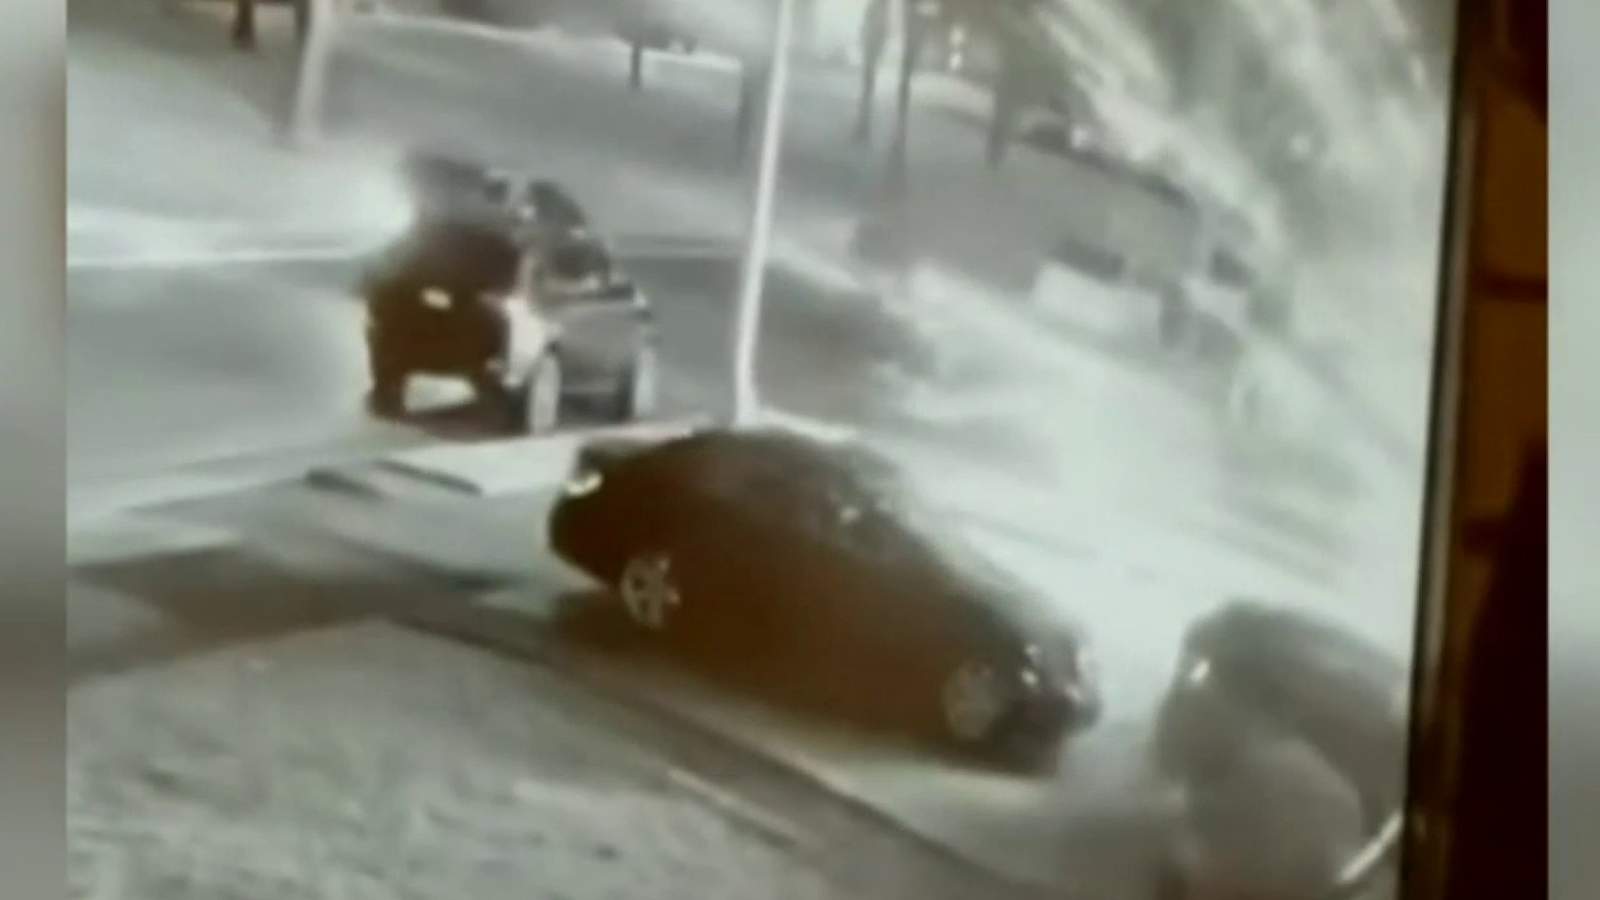 Video captures driver throwing explosive at Dearborn home